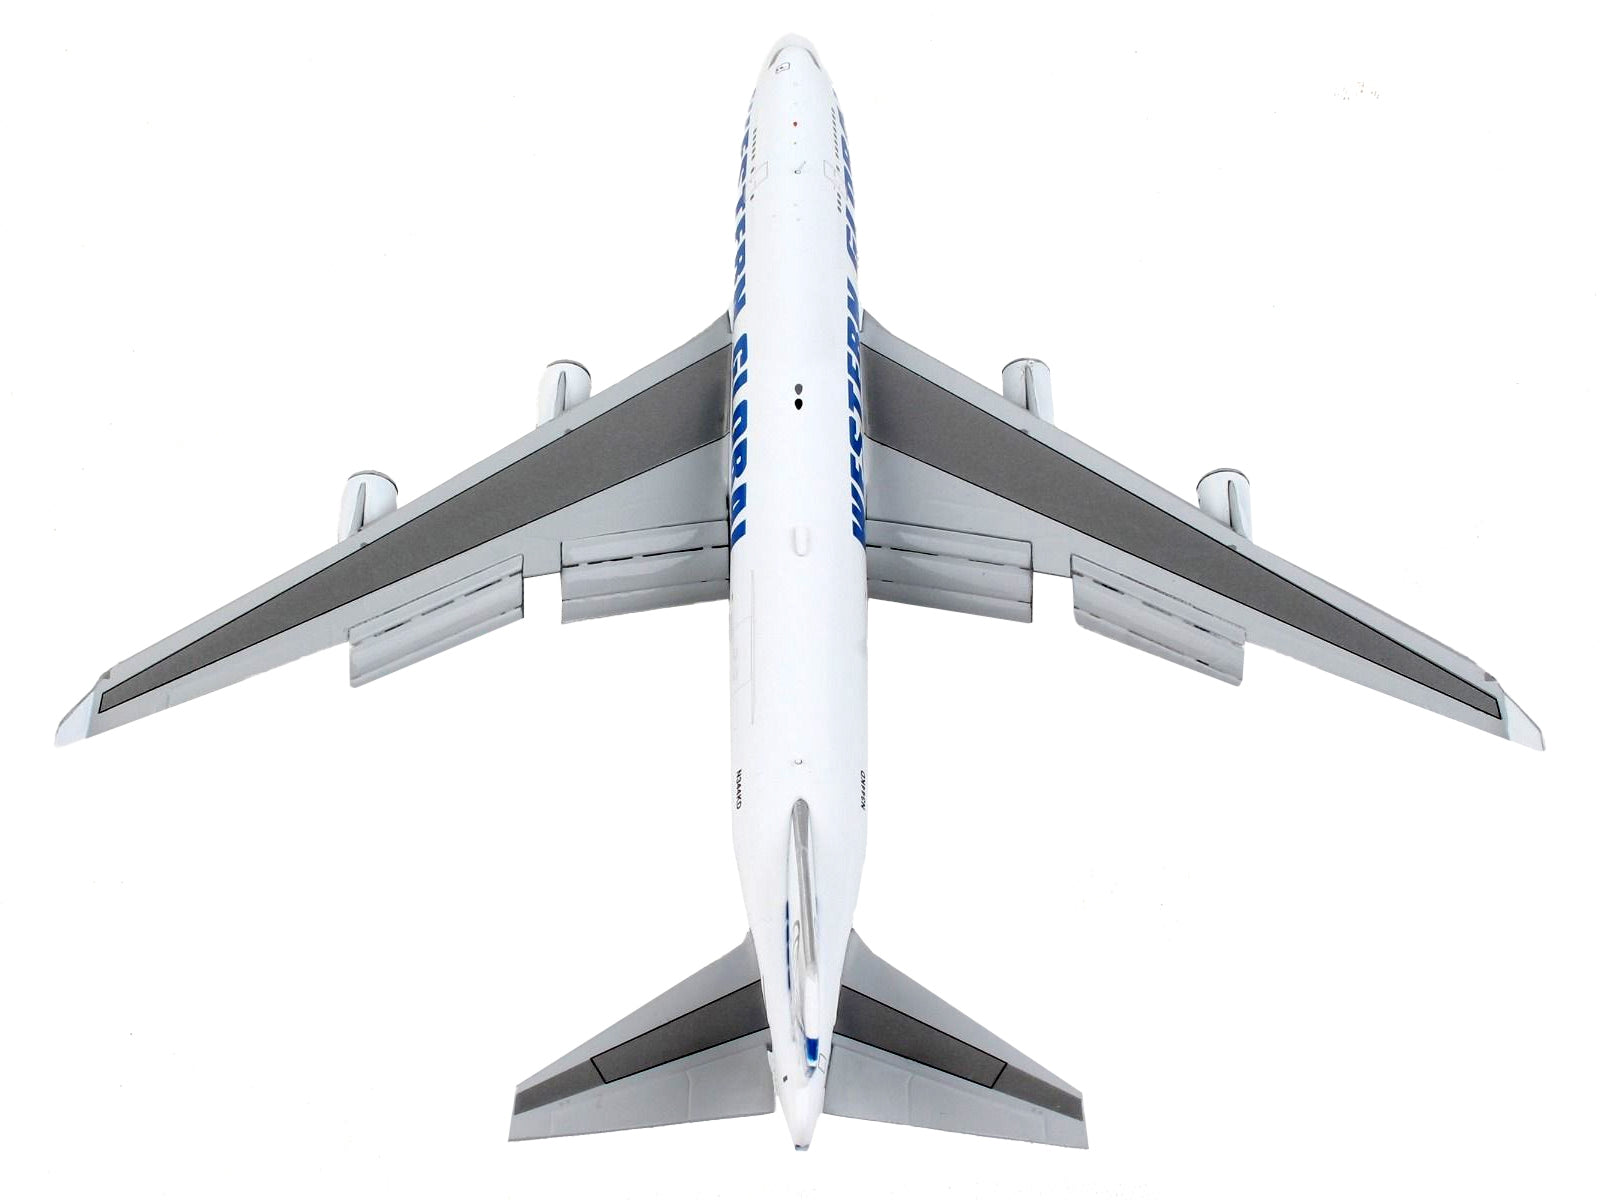 Boeing 747-400F Commercial Aircraft with Flaps Down "Western Global" White with Blue Tail Stripes 1/400 Diecast Model Airplane by GeminiJets